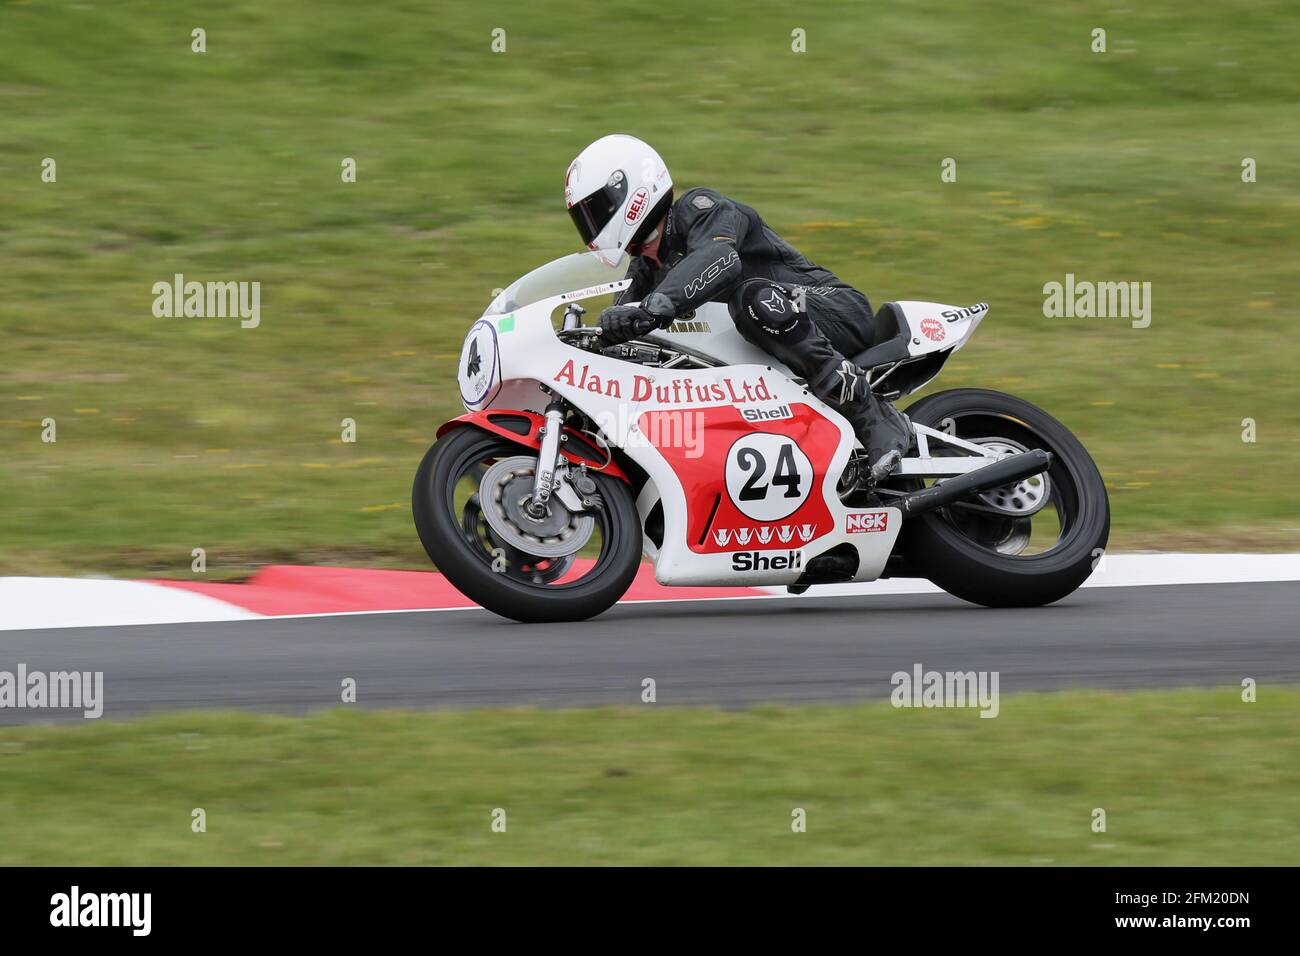 Alan Duffus aboard the Yamaha TZ 750 approaces The Gooseneck at the Cadwell Park International Classic in July 2015 Stock Photo